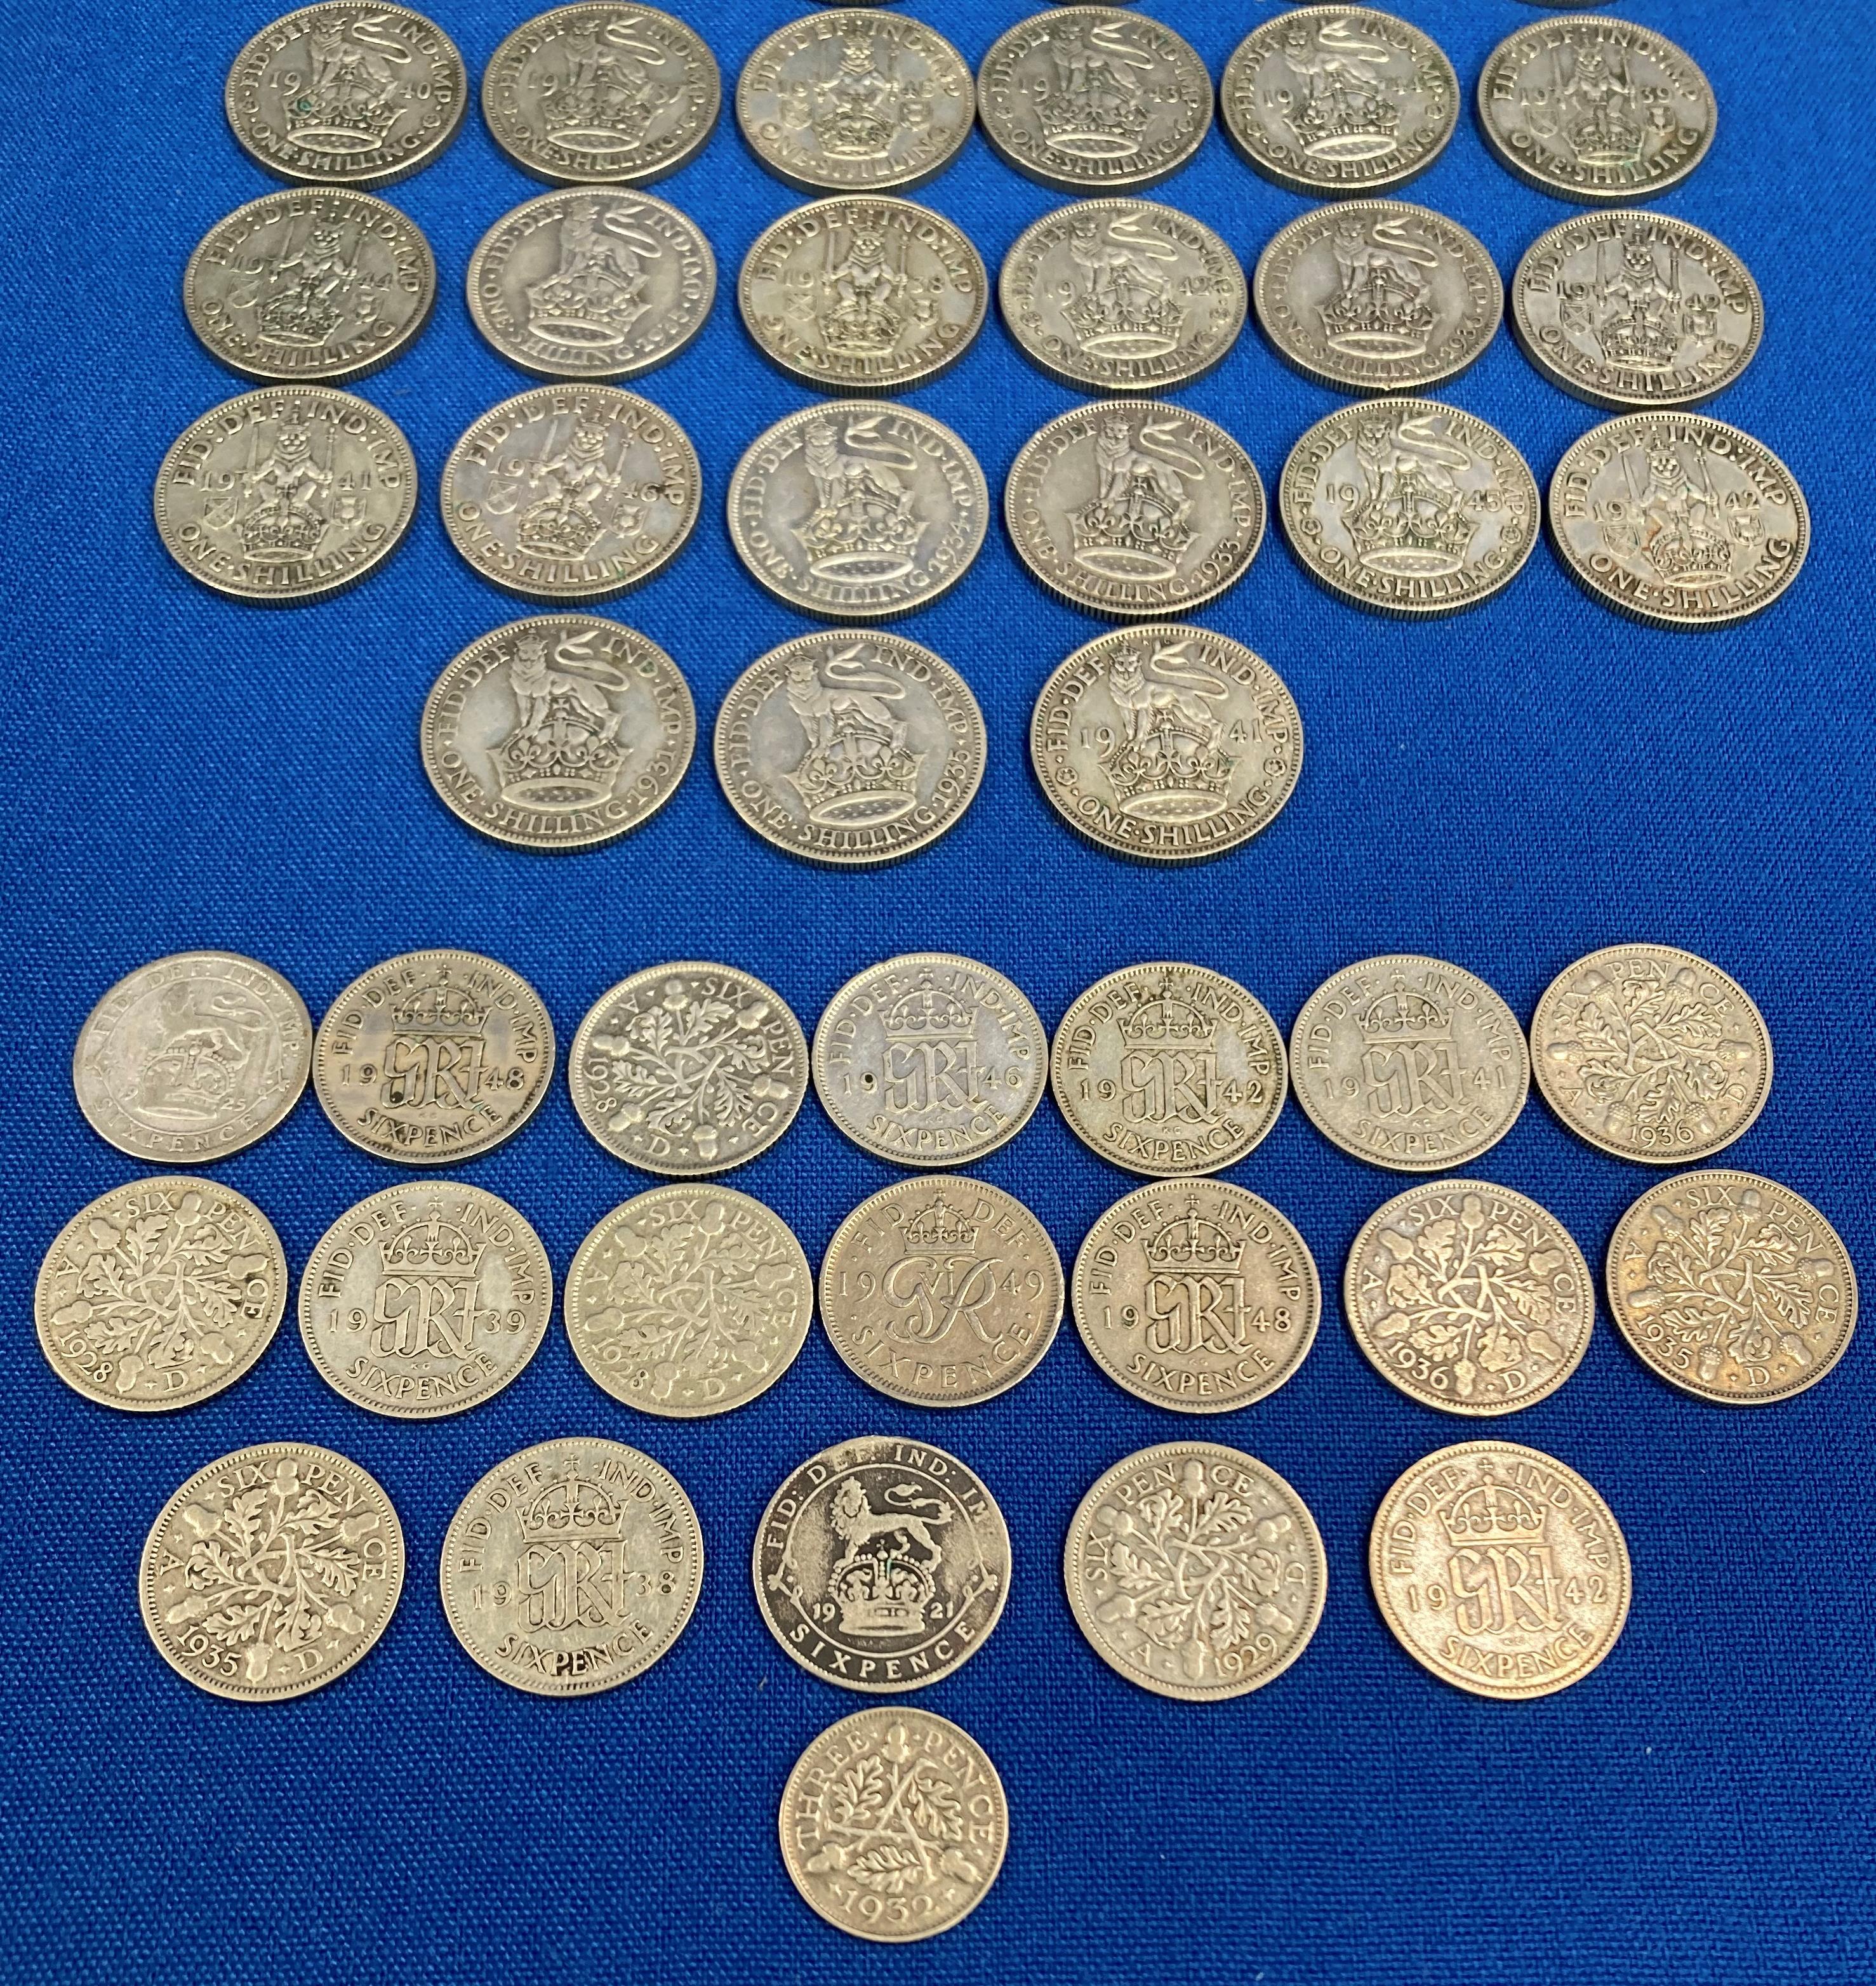 Assorted silver coins (1921-1946) including Shillings, Six Pence pieces, etc. - Image 3 of 5